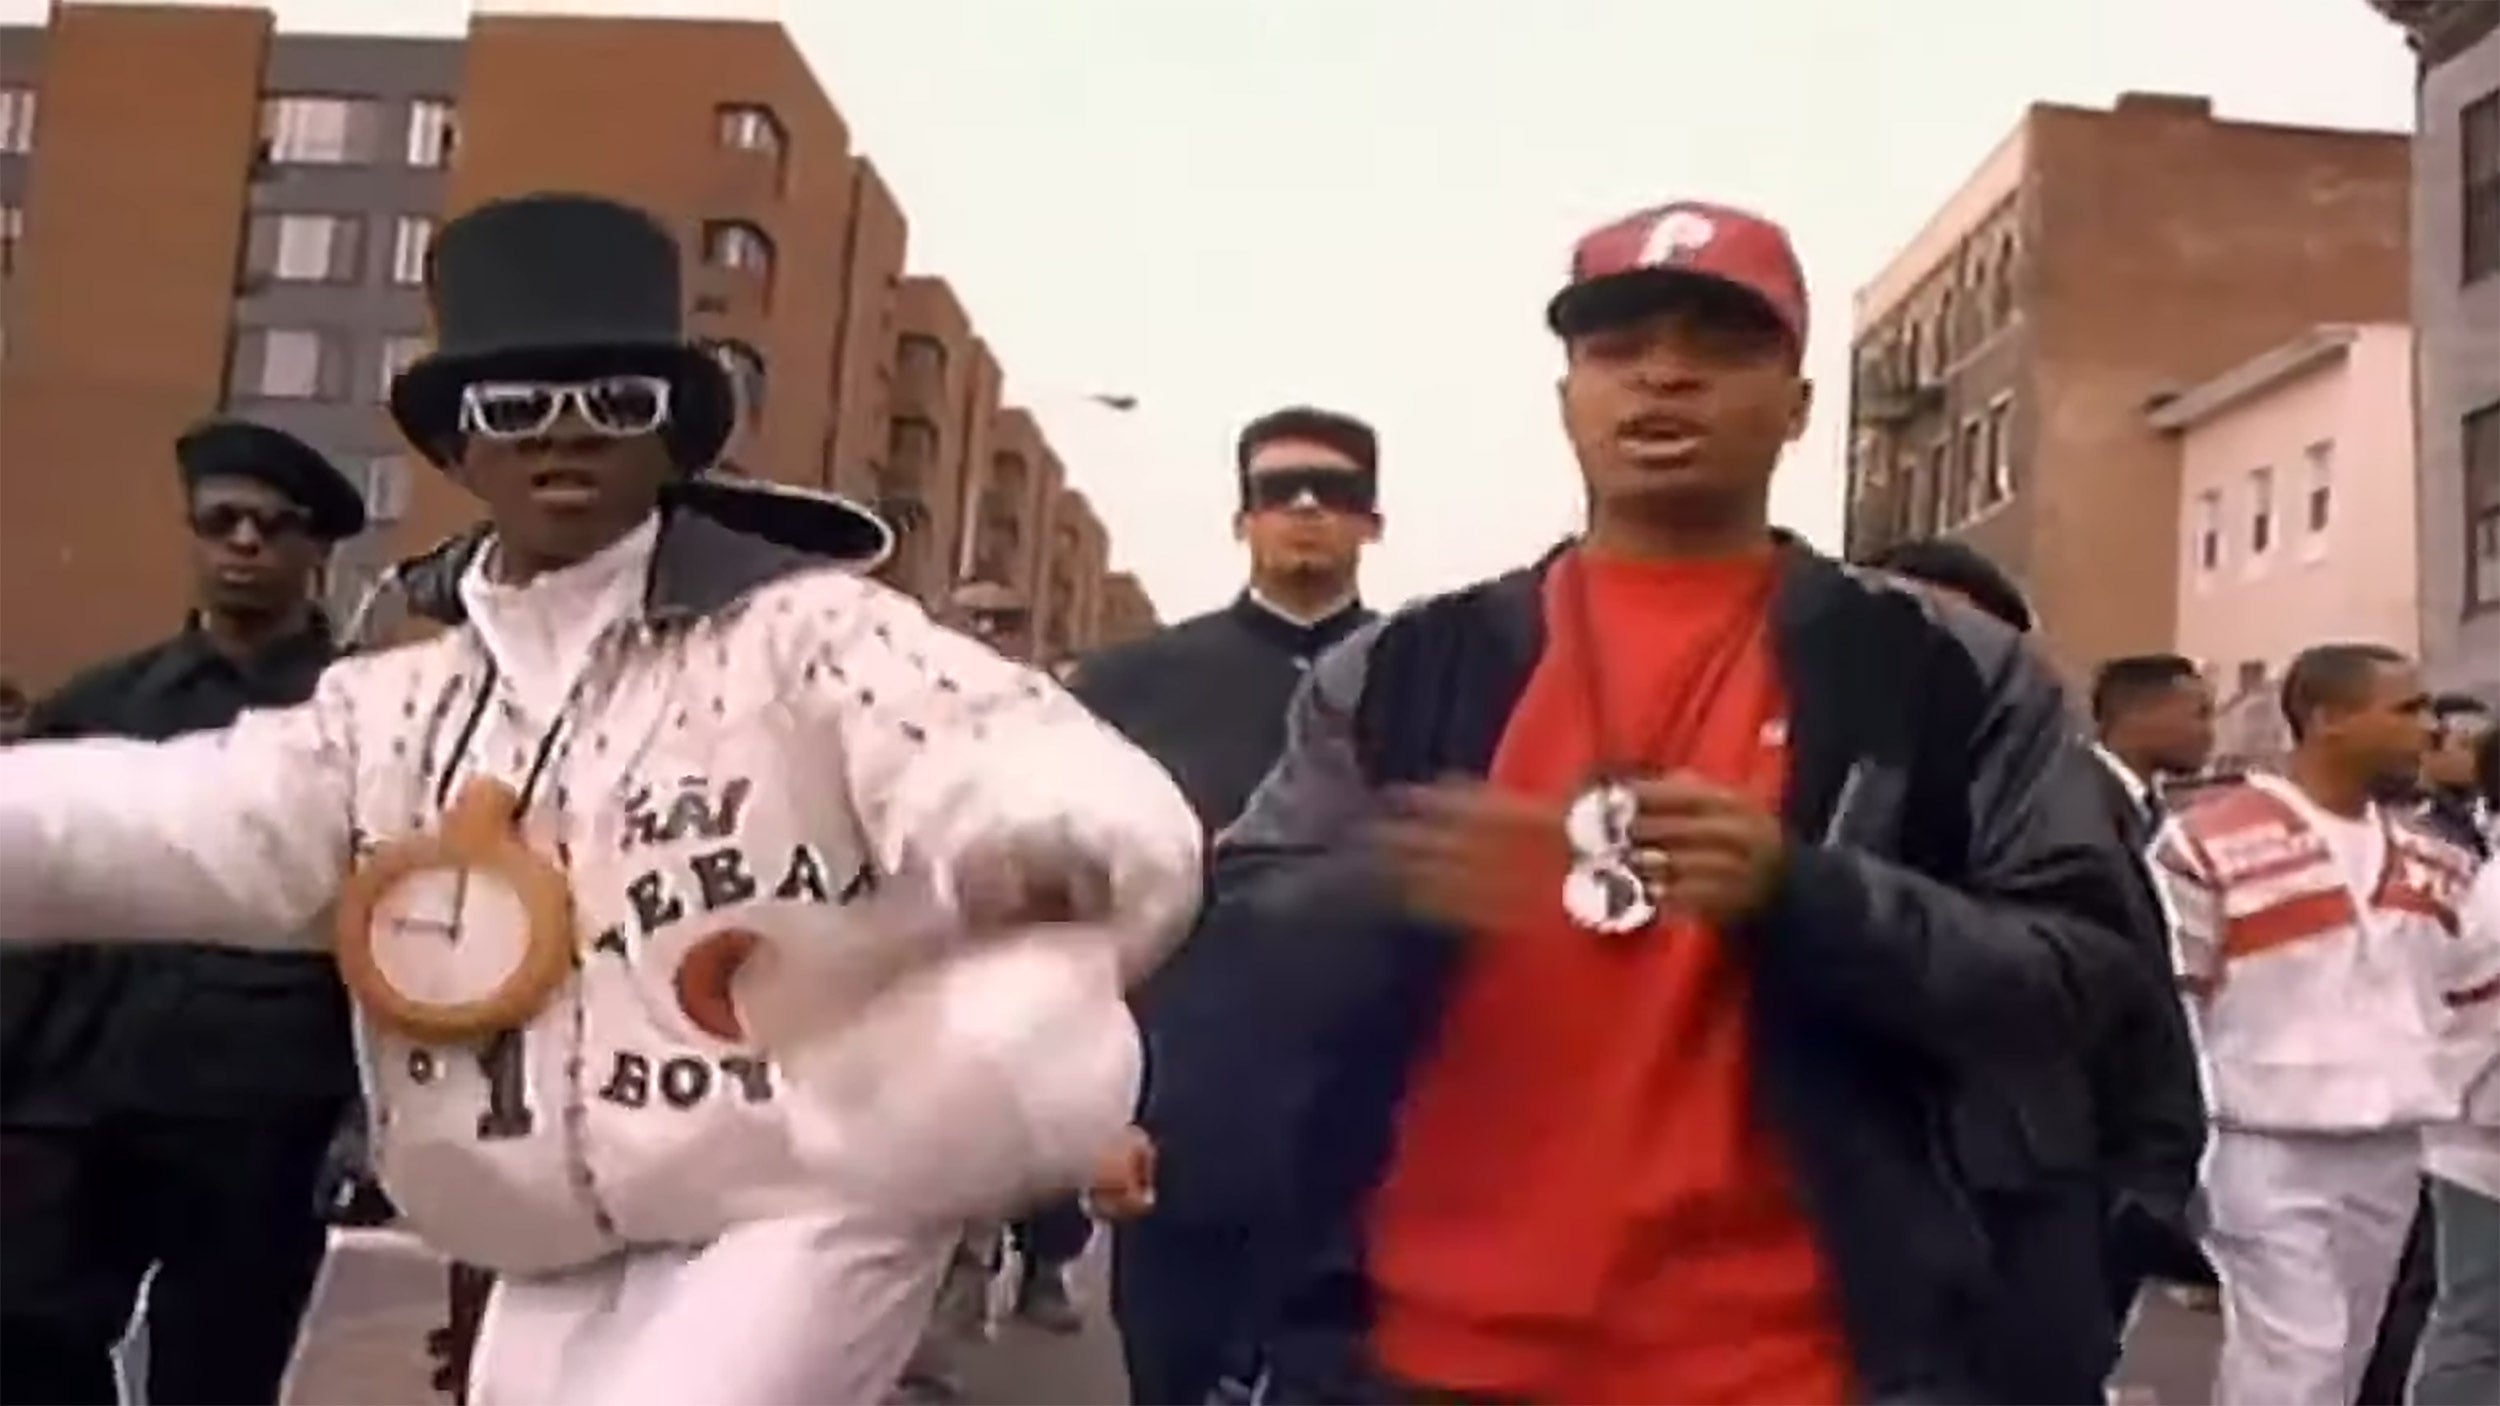 Chuck D and Flavor Flav march in Public Enemy's "Fight the Power" video.